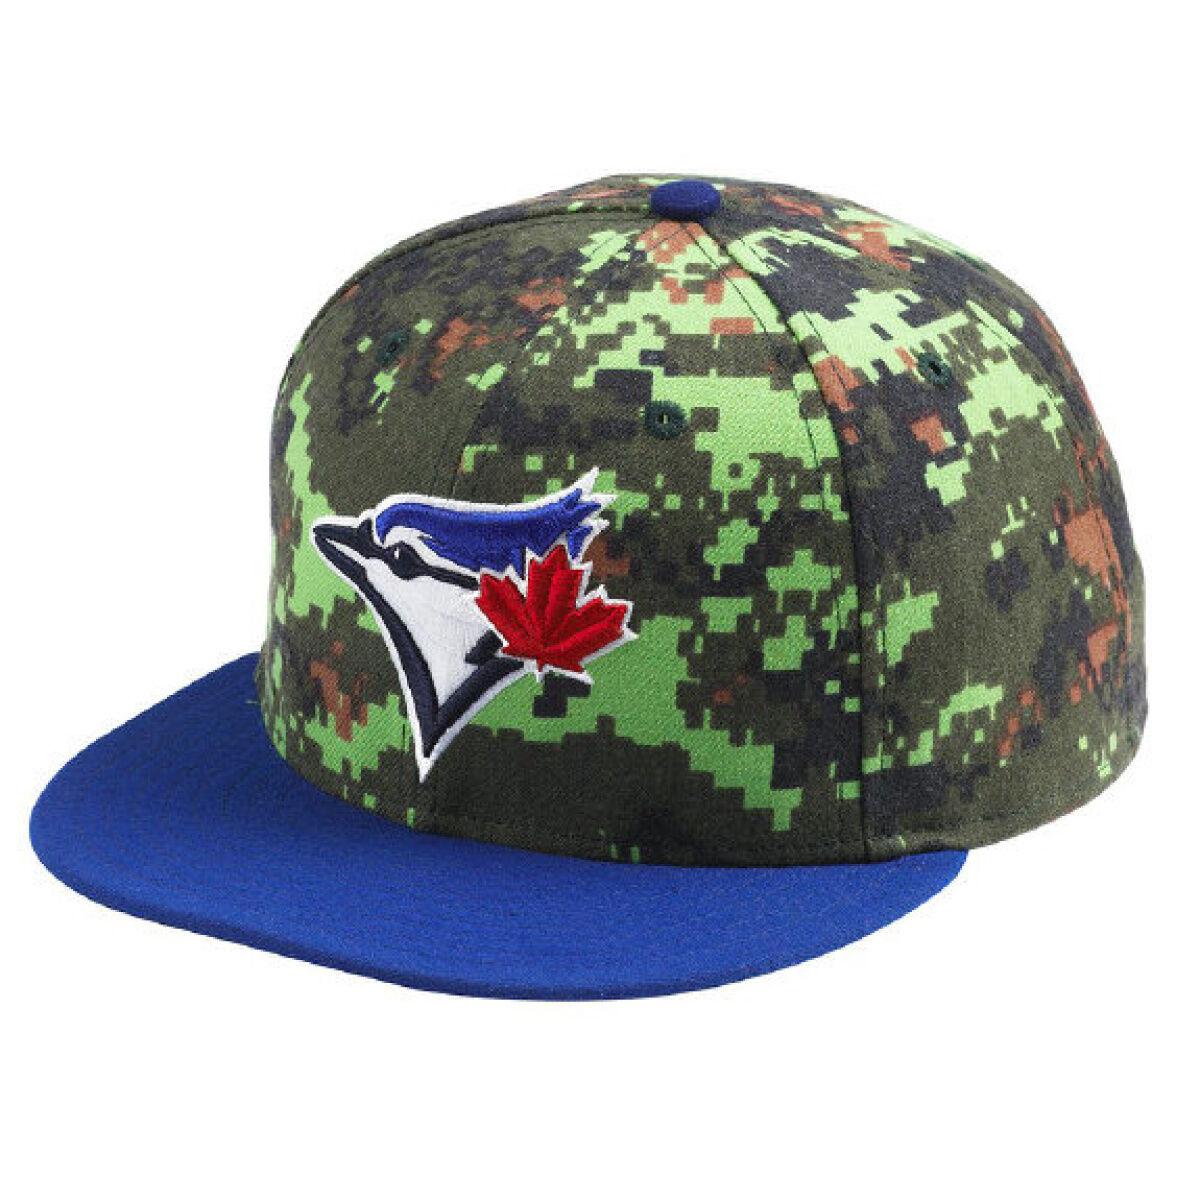 Report: All of MLB to wear camouflage-themed uniforms Memorial Day